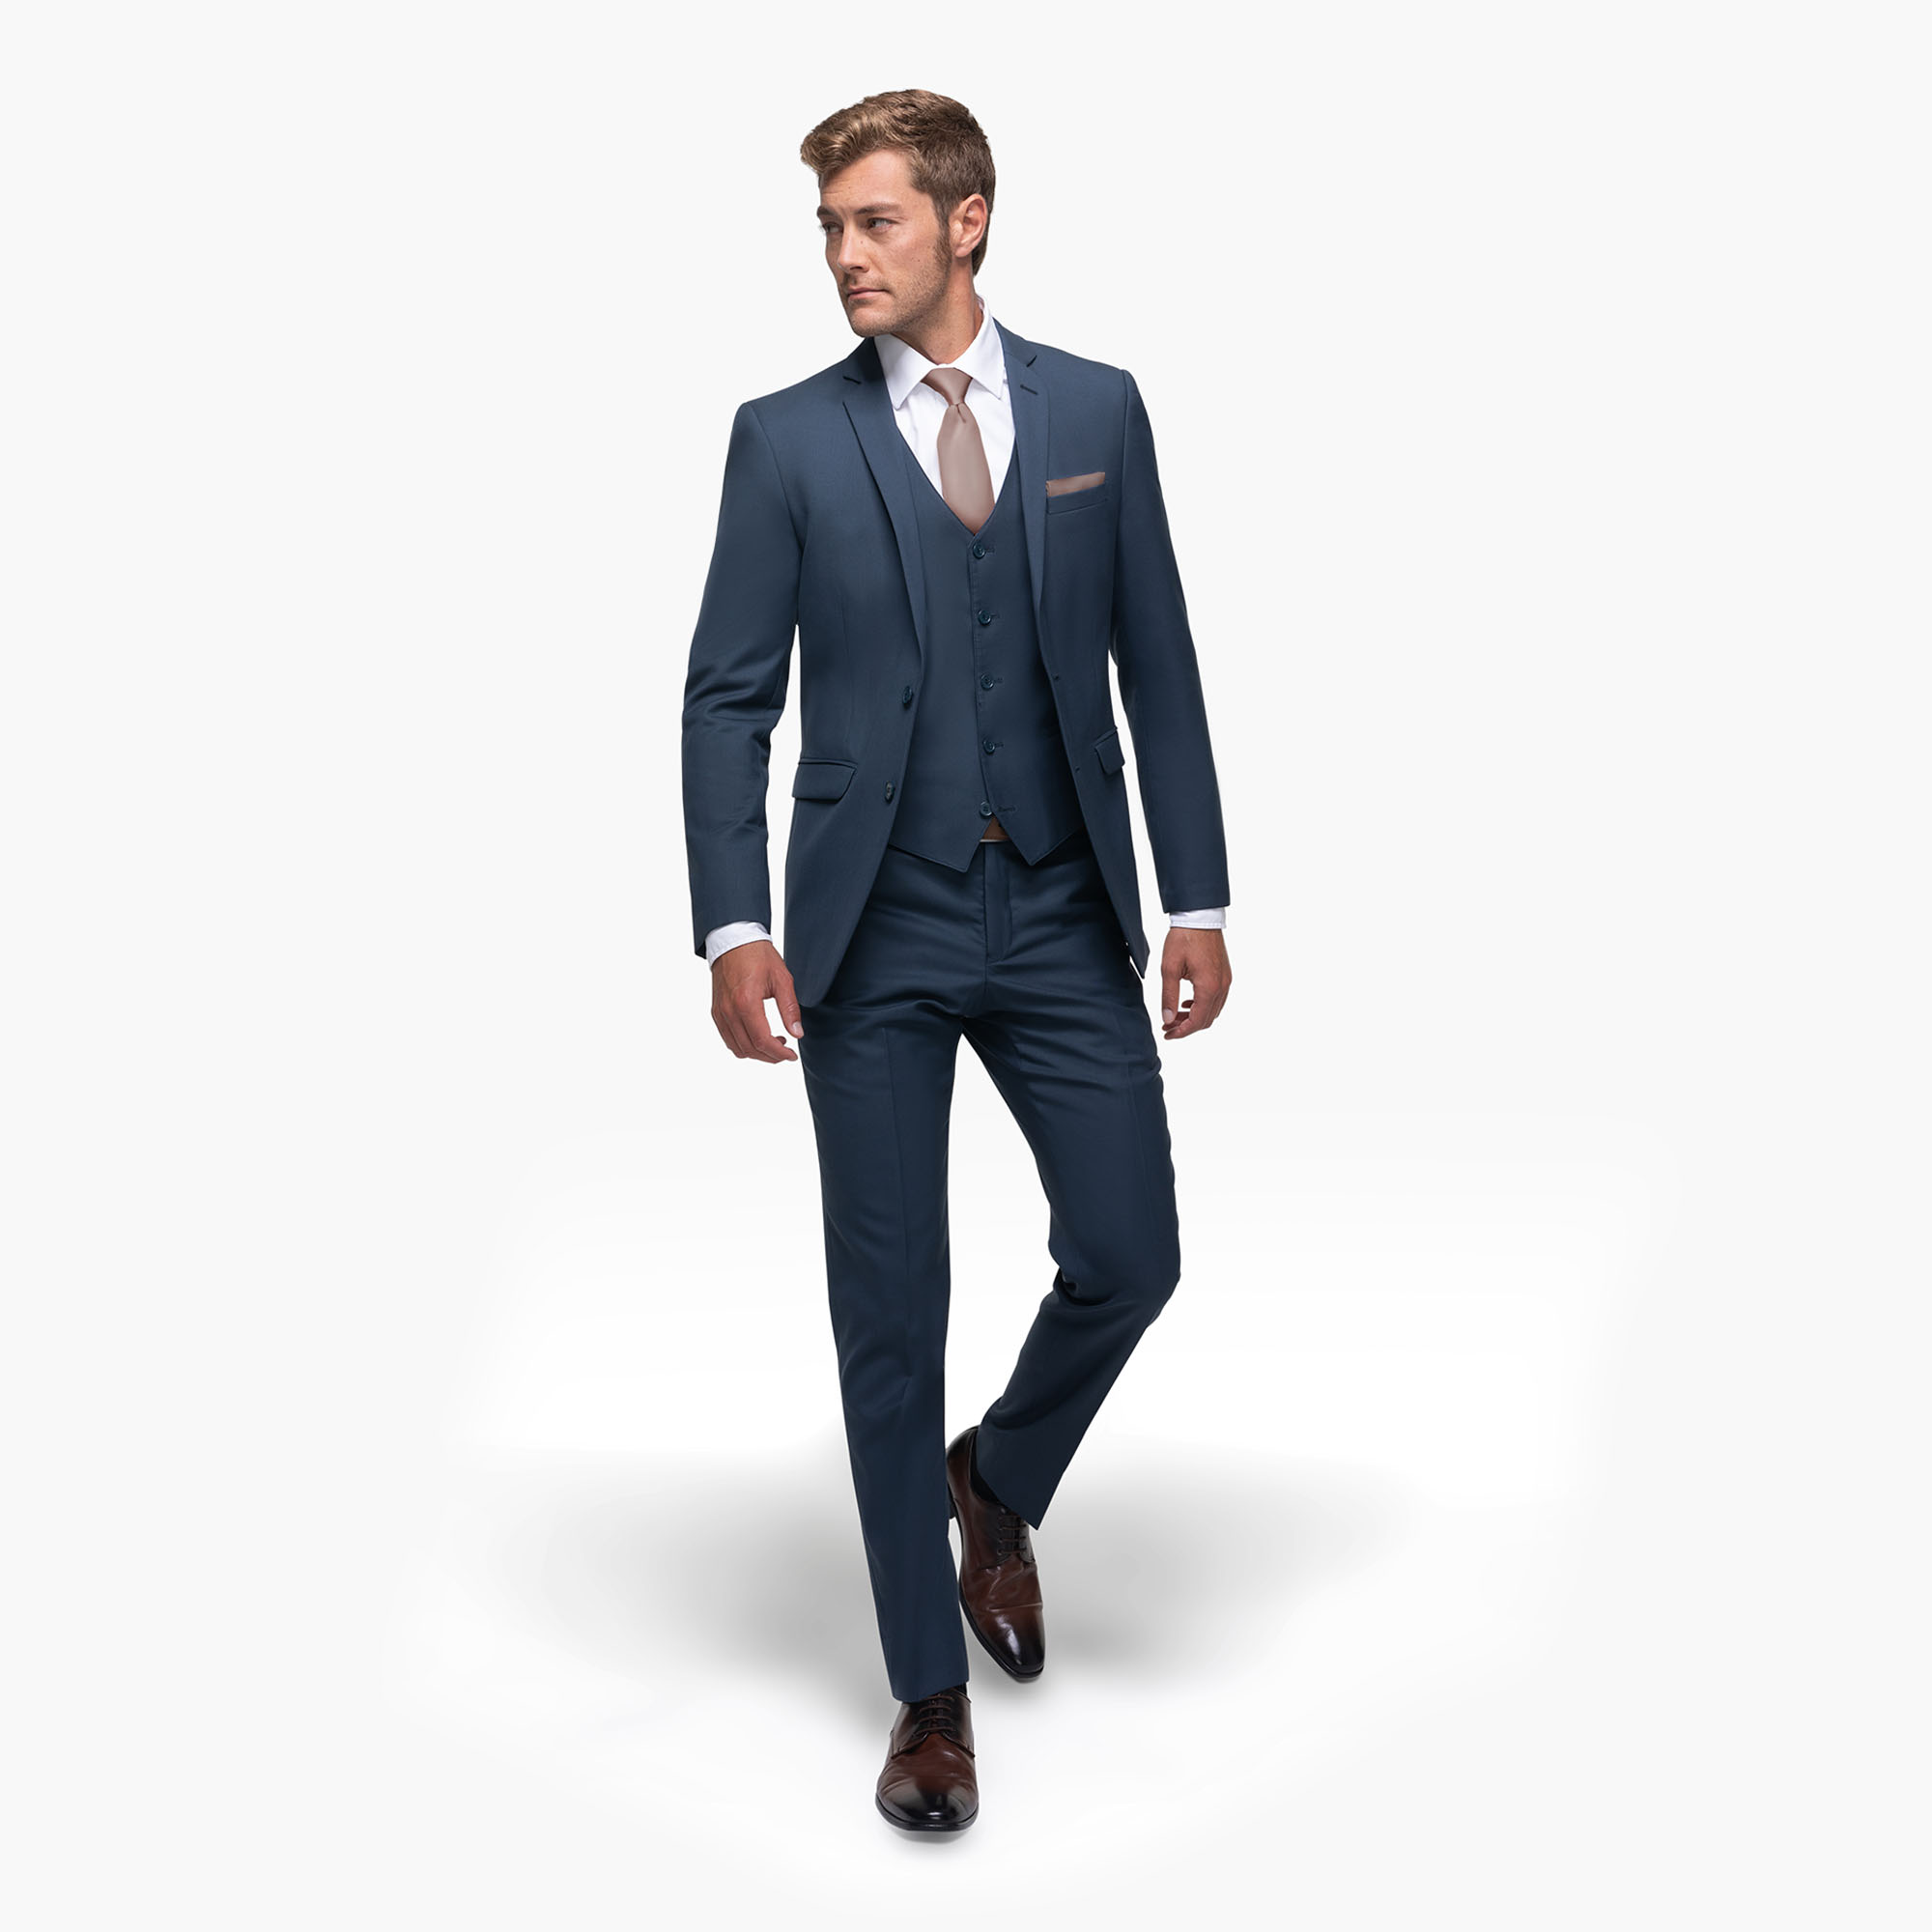 Rental Tuxedos: How Bad Are They? - Honest Reviews Of Men's Wearhouse, THE  BLK TUX, Menguin/Generation Tux